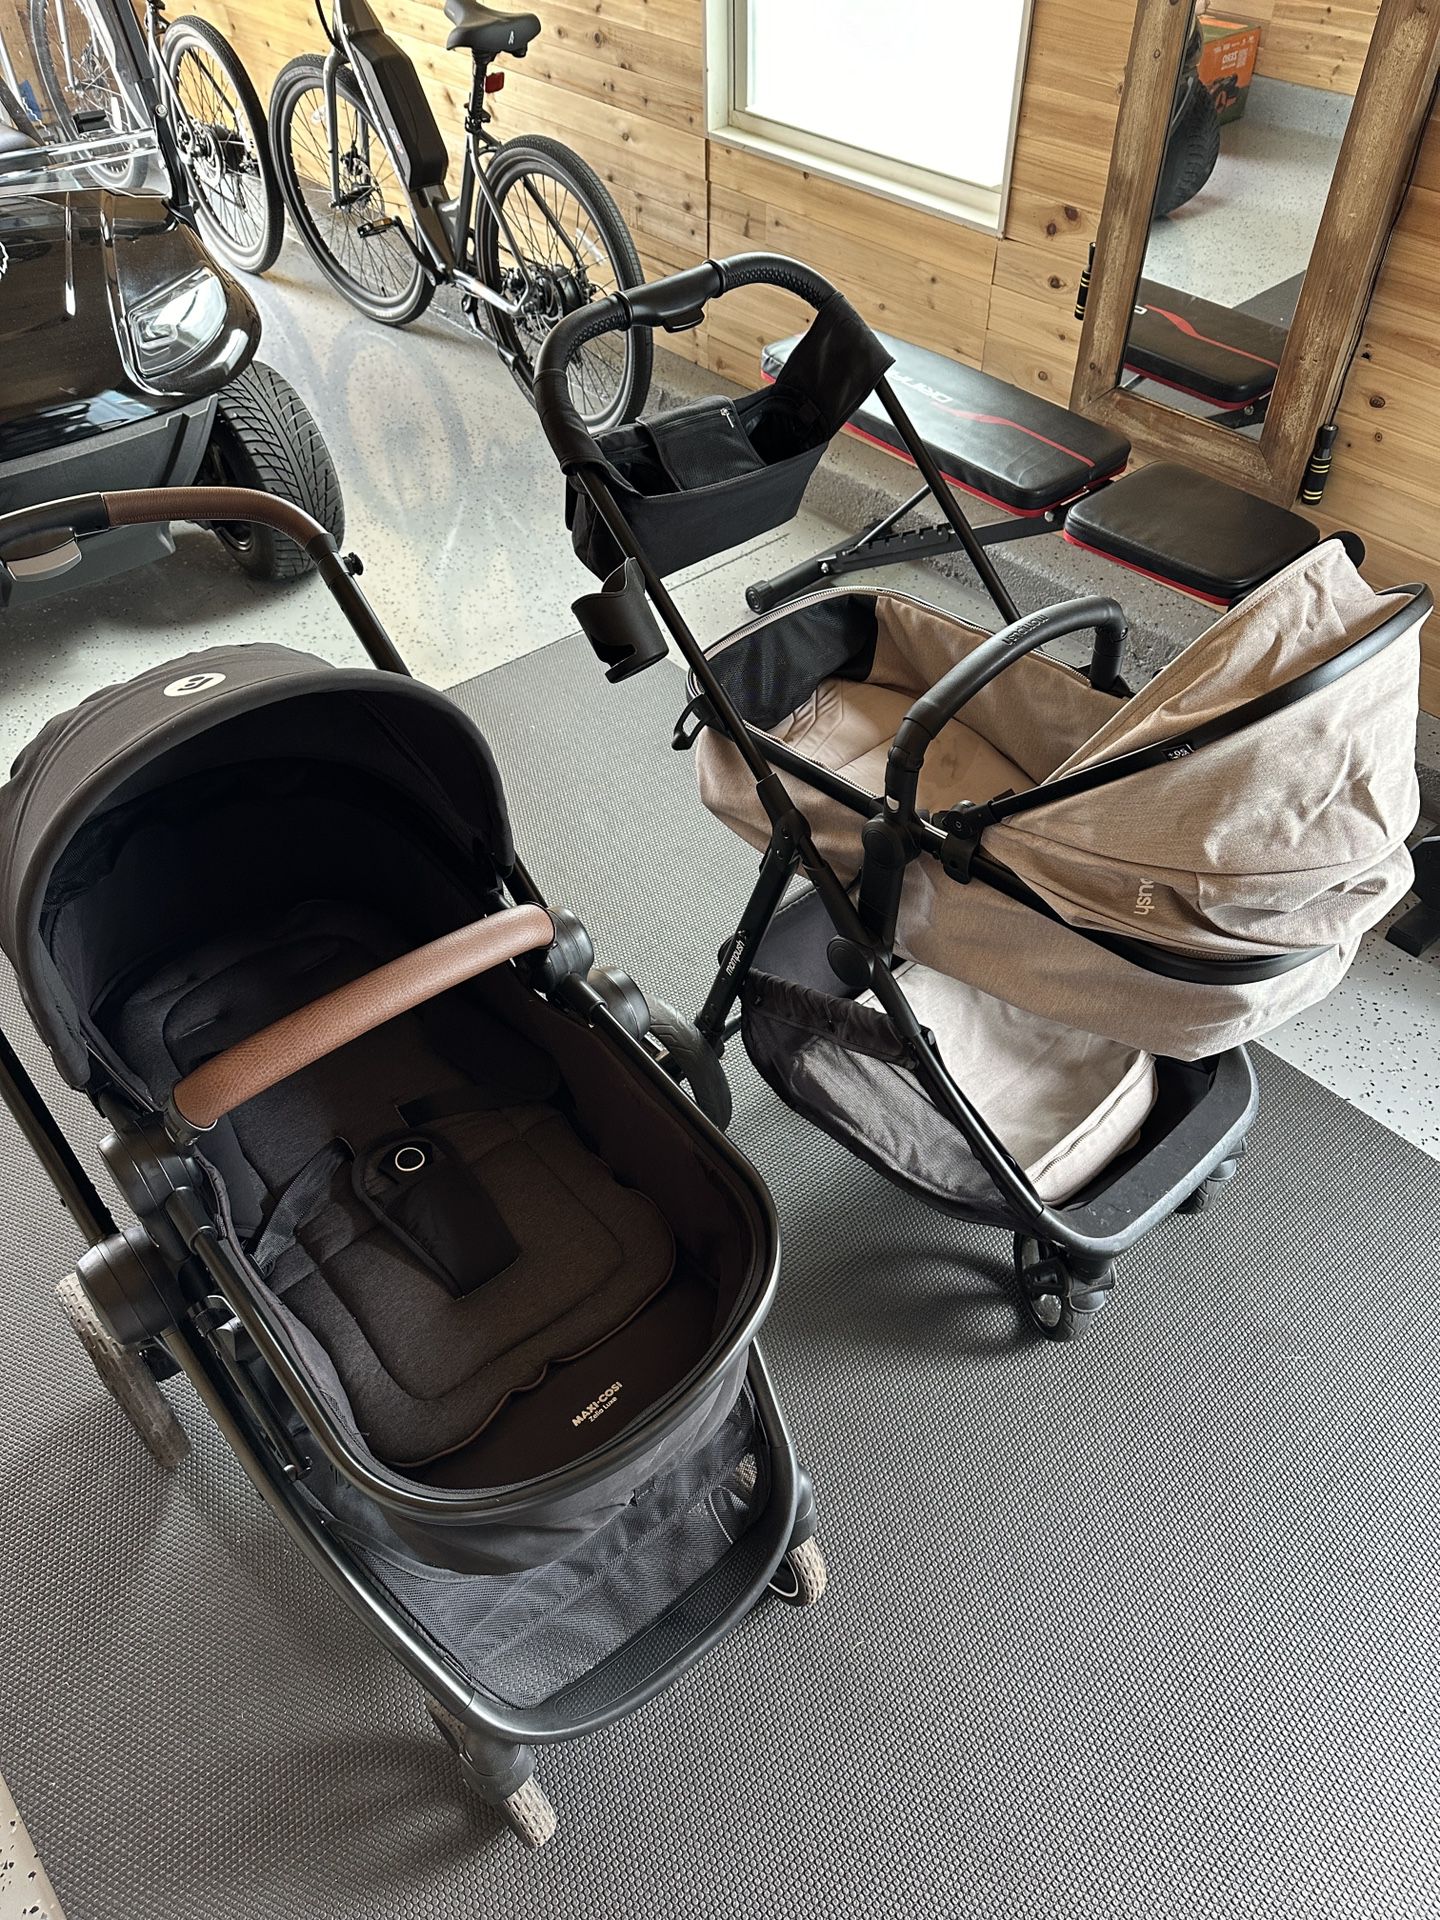 2 Strollers - Fairly New - Both Folding